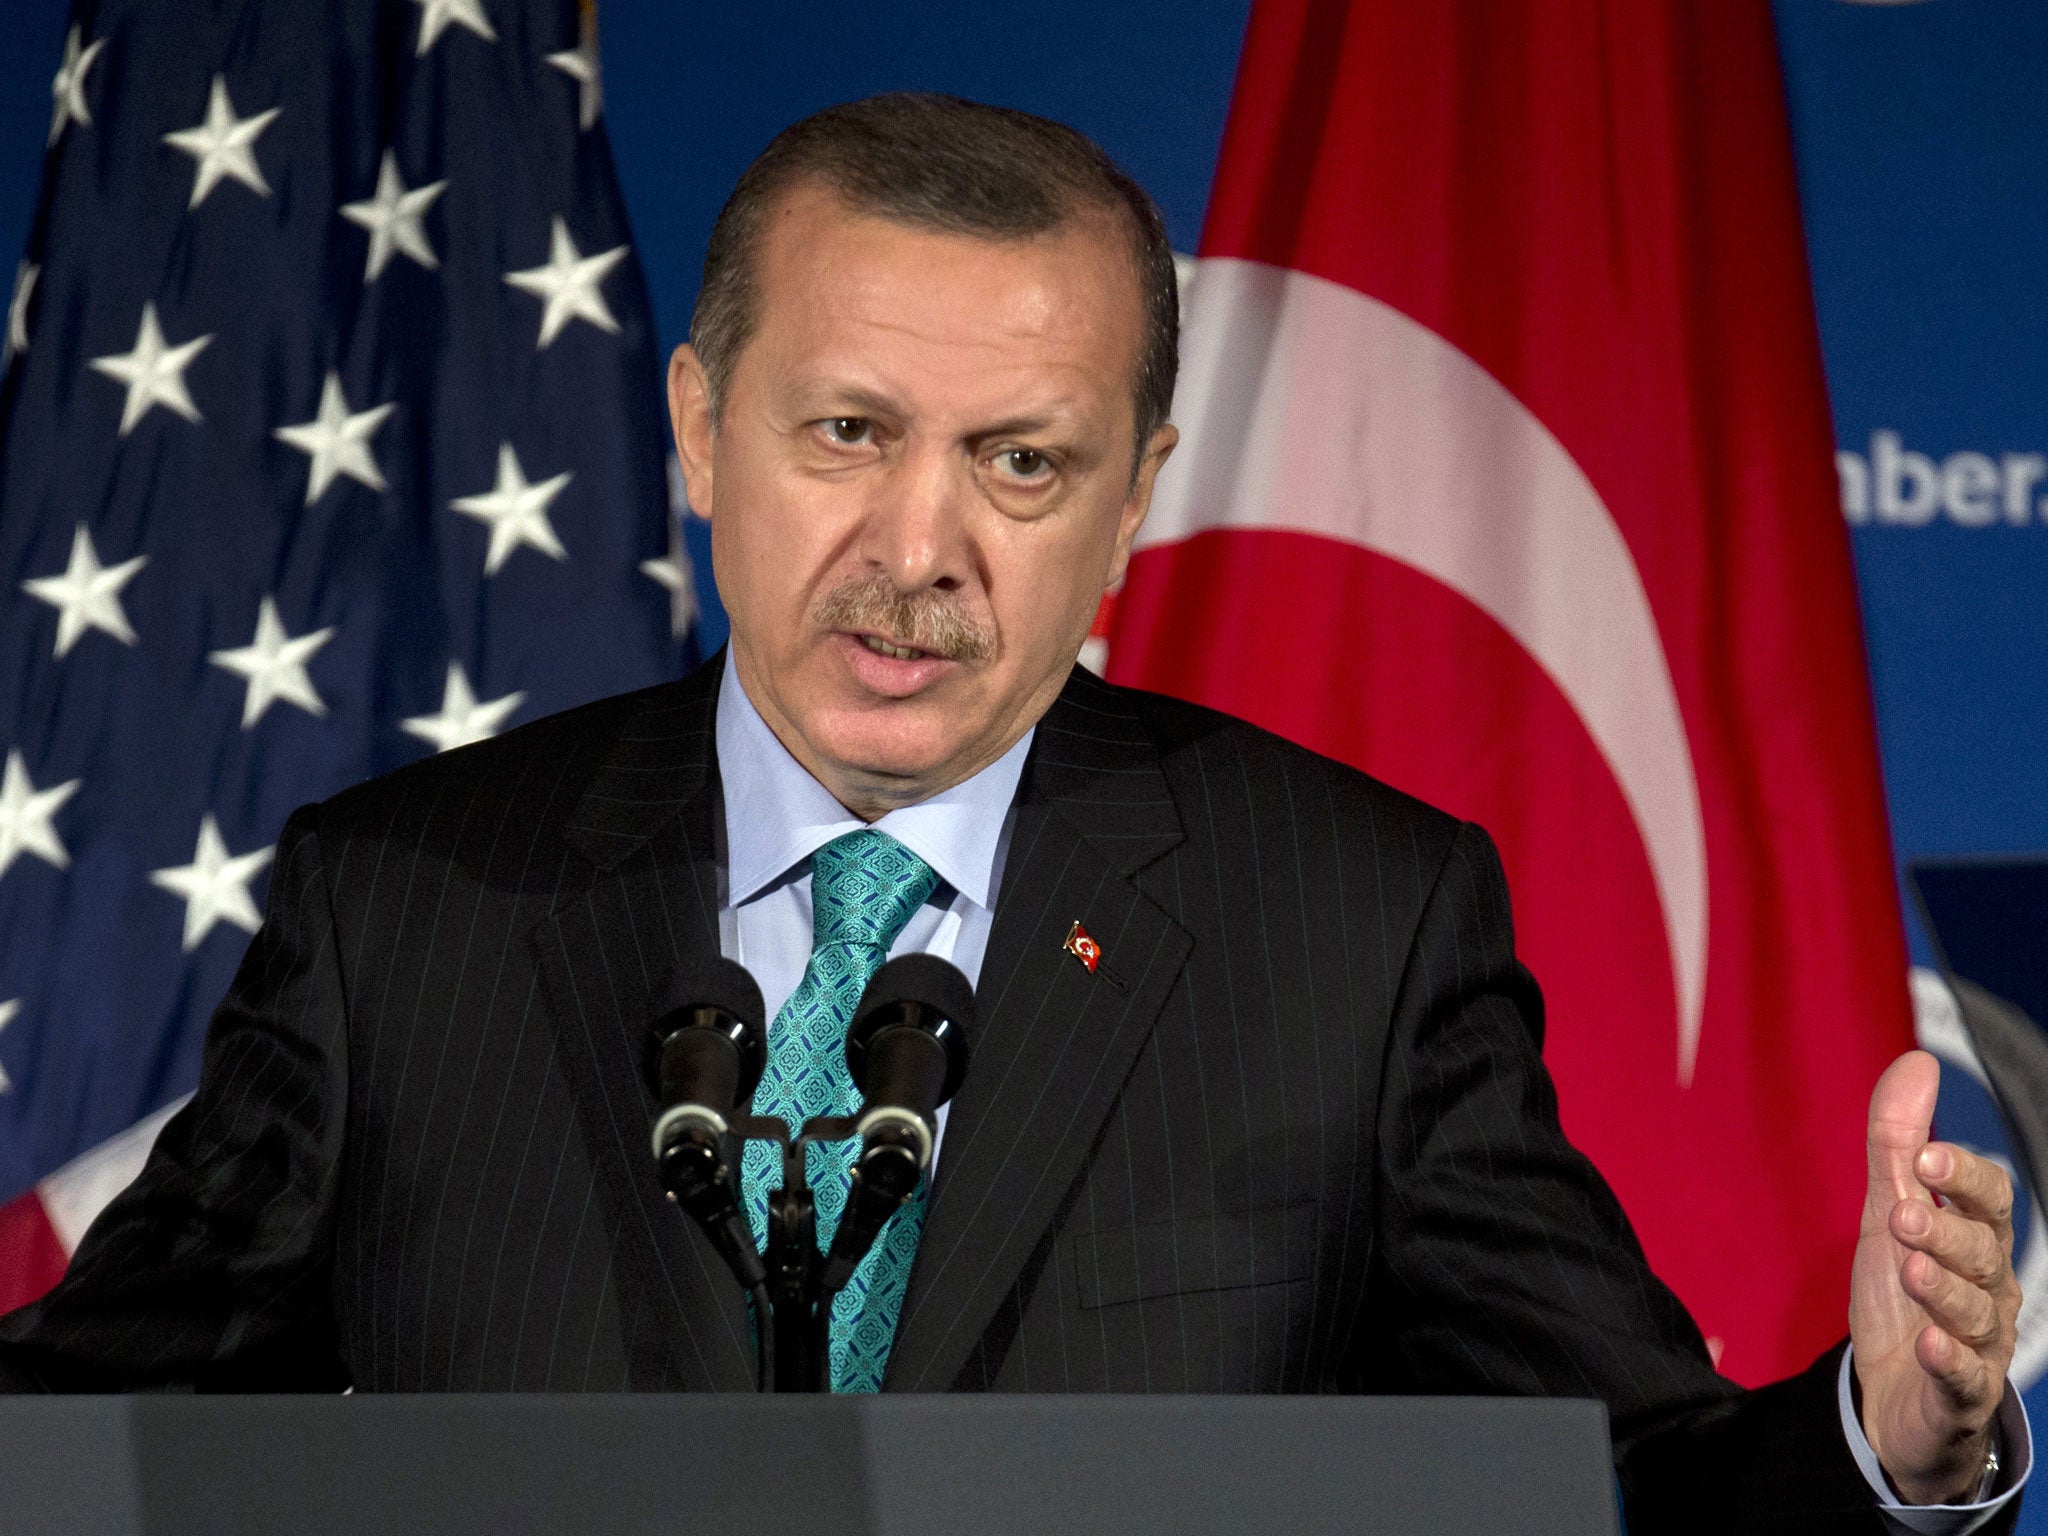 The Turkish premier, Recep Tayyip Erdogan, received sympathy and words of support from Barack Obama but no promise of drastic action against the Damascus regime